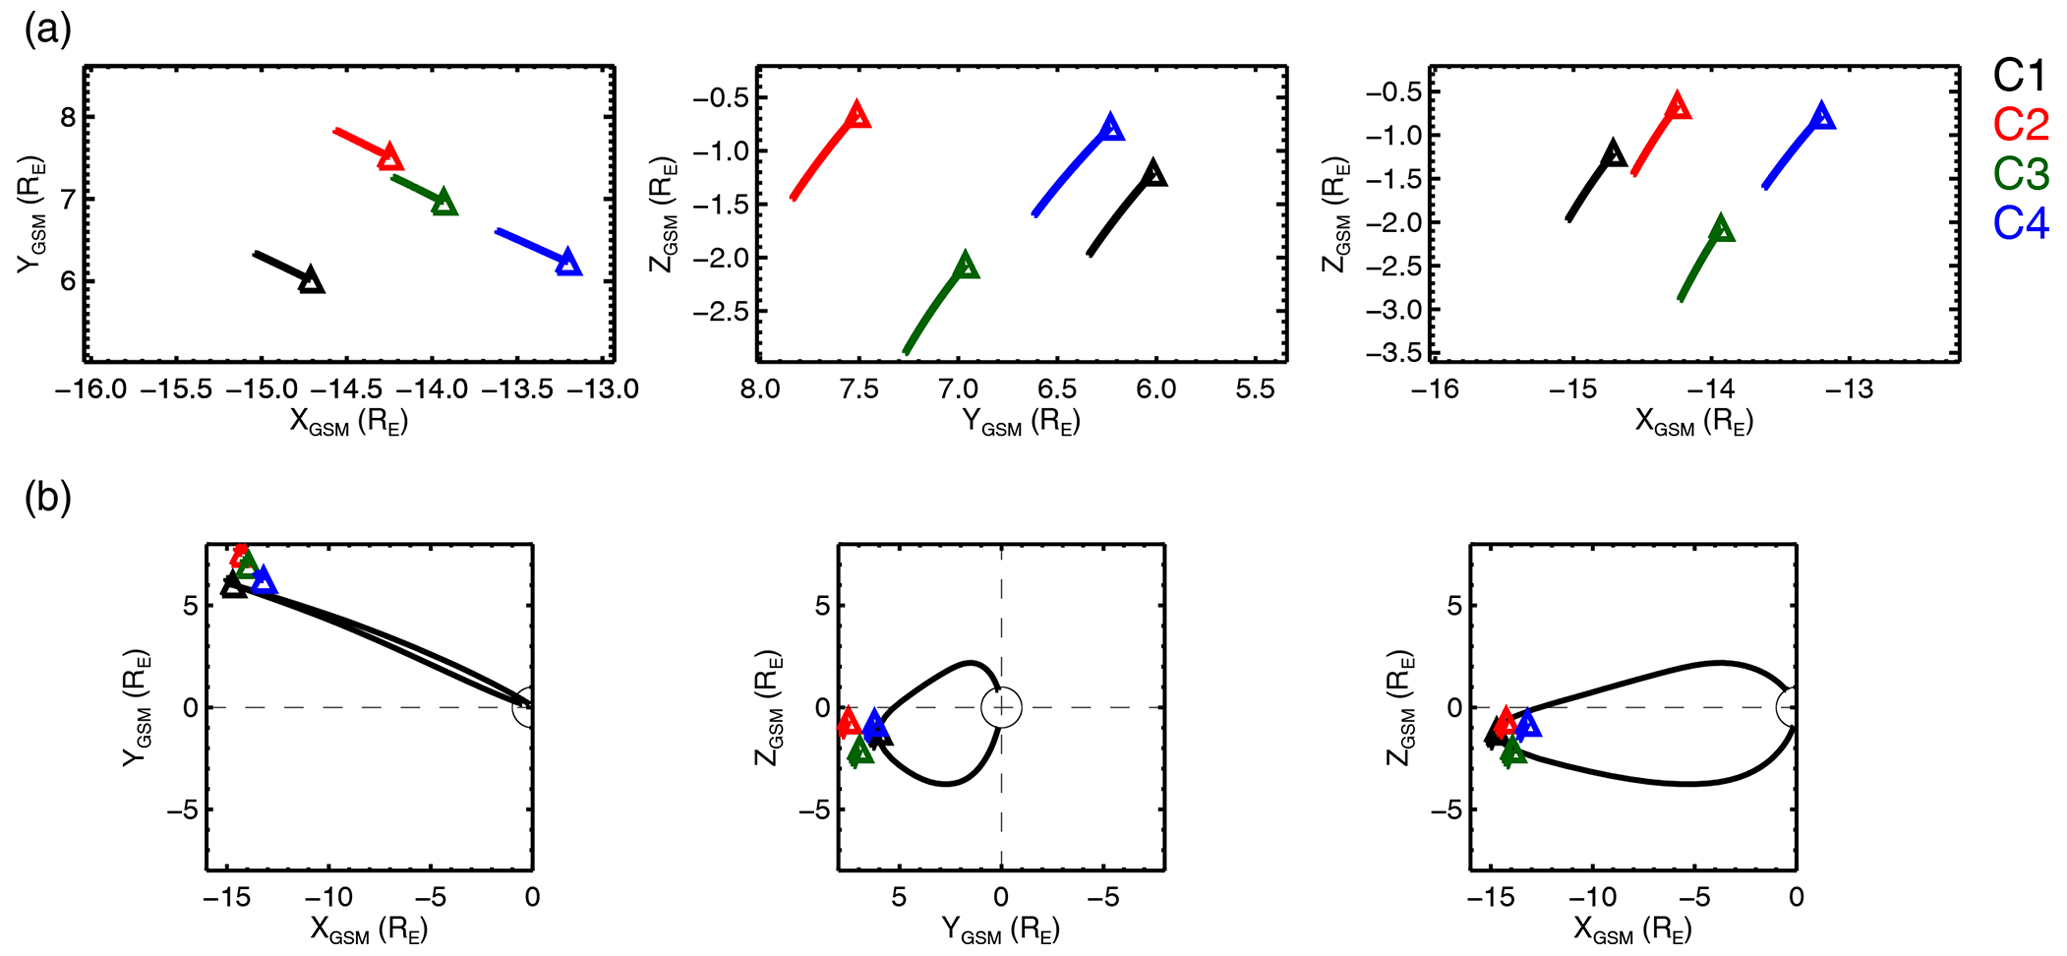 ANGEO - Dynamics of variable dusk–dawn flow associated with 